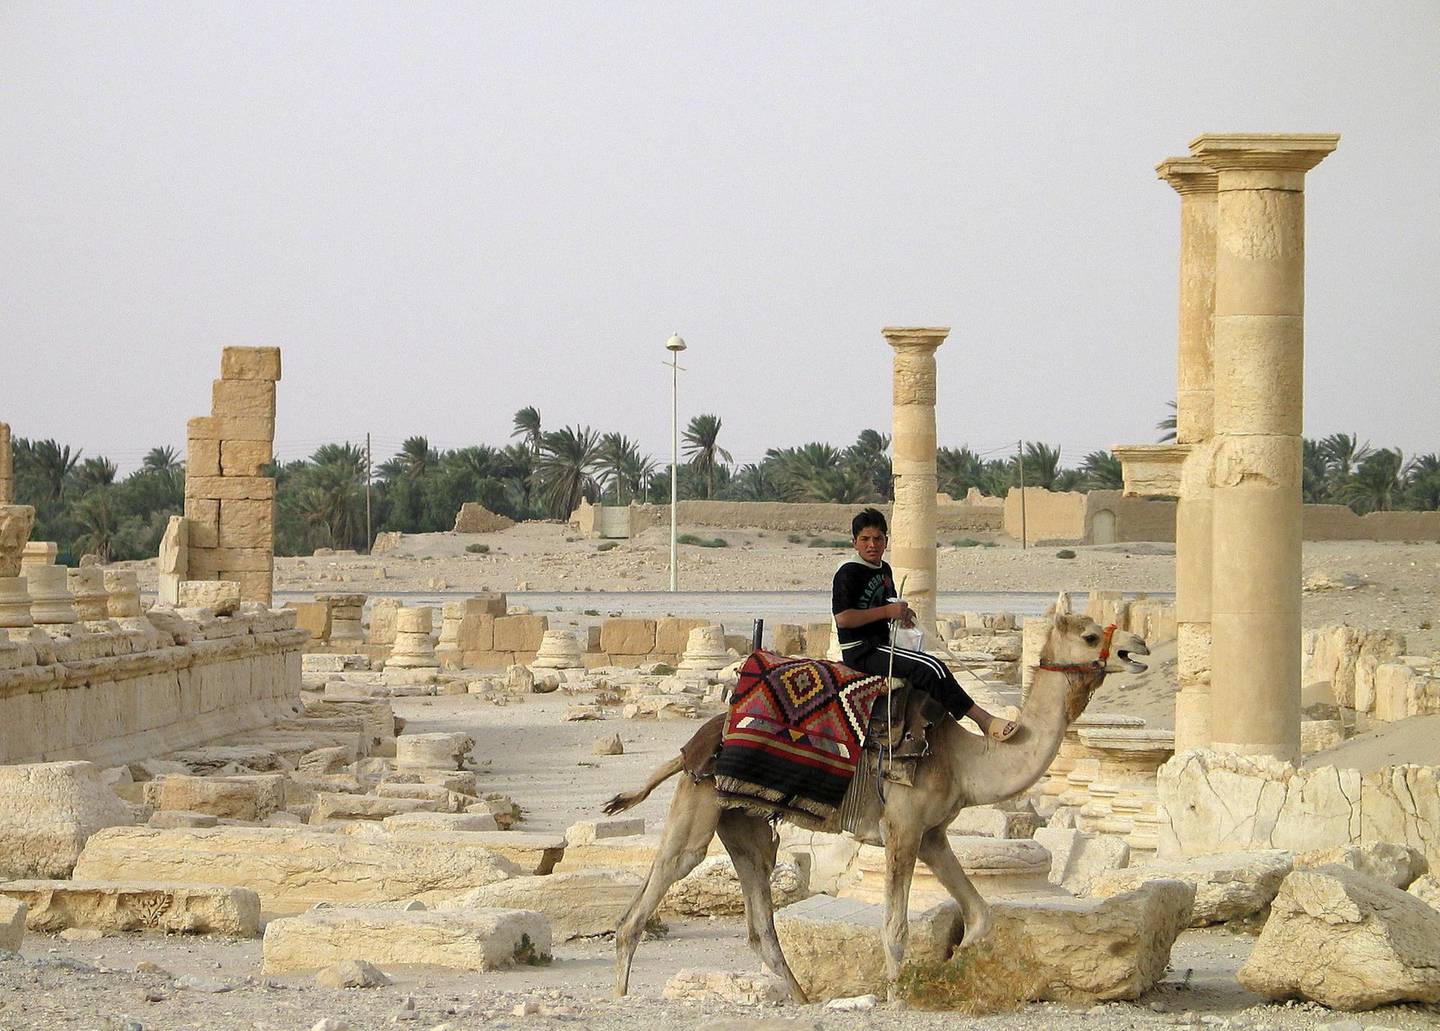 A boy rides a camel in the historical city of Palmyra, Syria, June 12, 2009. Satellite images have confirmed the destruction of the Temple of Bel, which was one of the best preserved Roman-era sites in the Syrian city of Palmyra, a United Nations agency said, after activists said the hardline Islamic State group had targeted it. The Syrian Observatory for Human Rights monitoring group and other activists said on August 30, 2015 that Islamic State had destroyed part of the more than 2,000-year-old temple, one of Palmyra's most important monuments. Picture taken June 12, 2009.  REUTERS/Gustau Nacarino